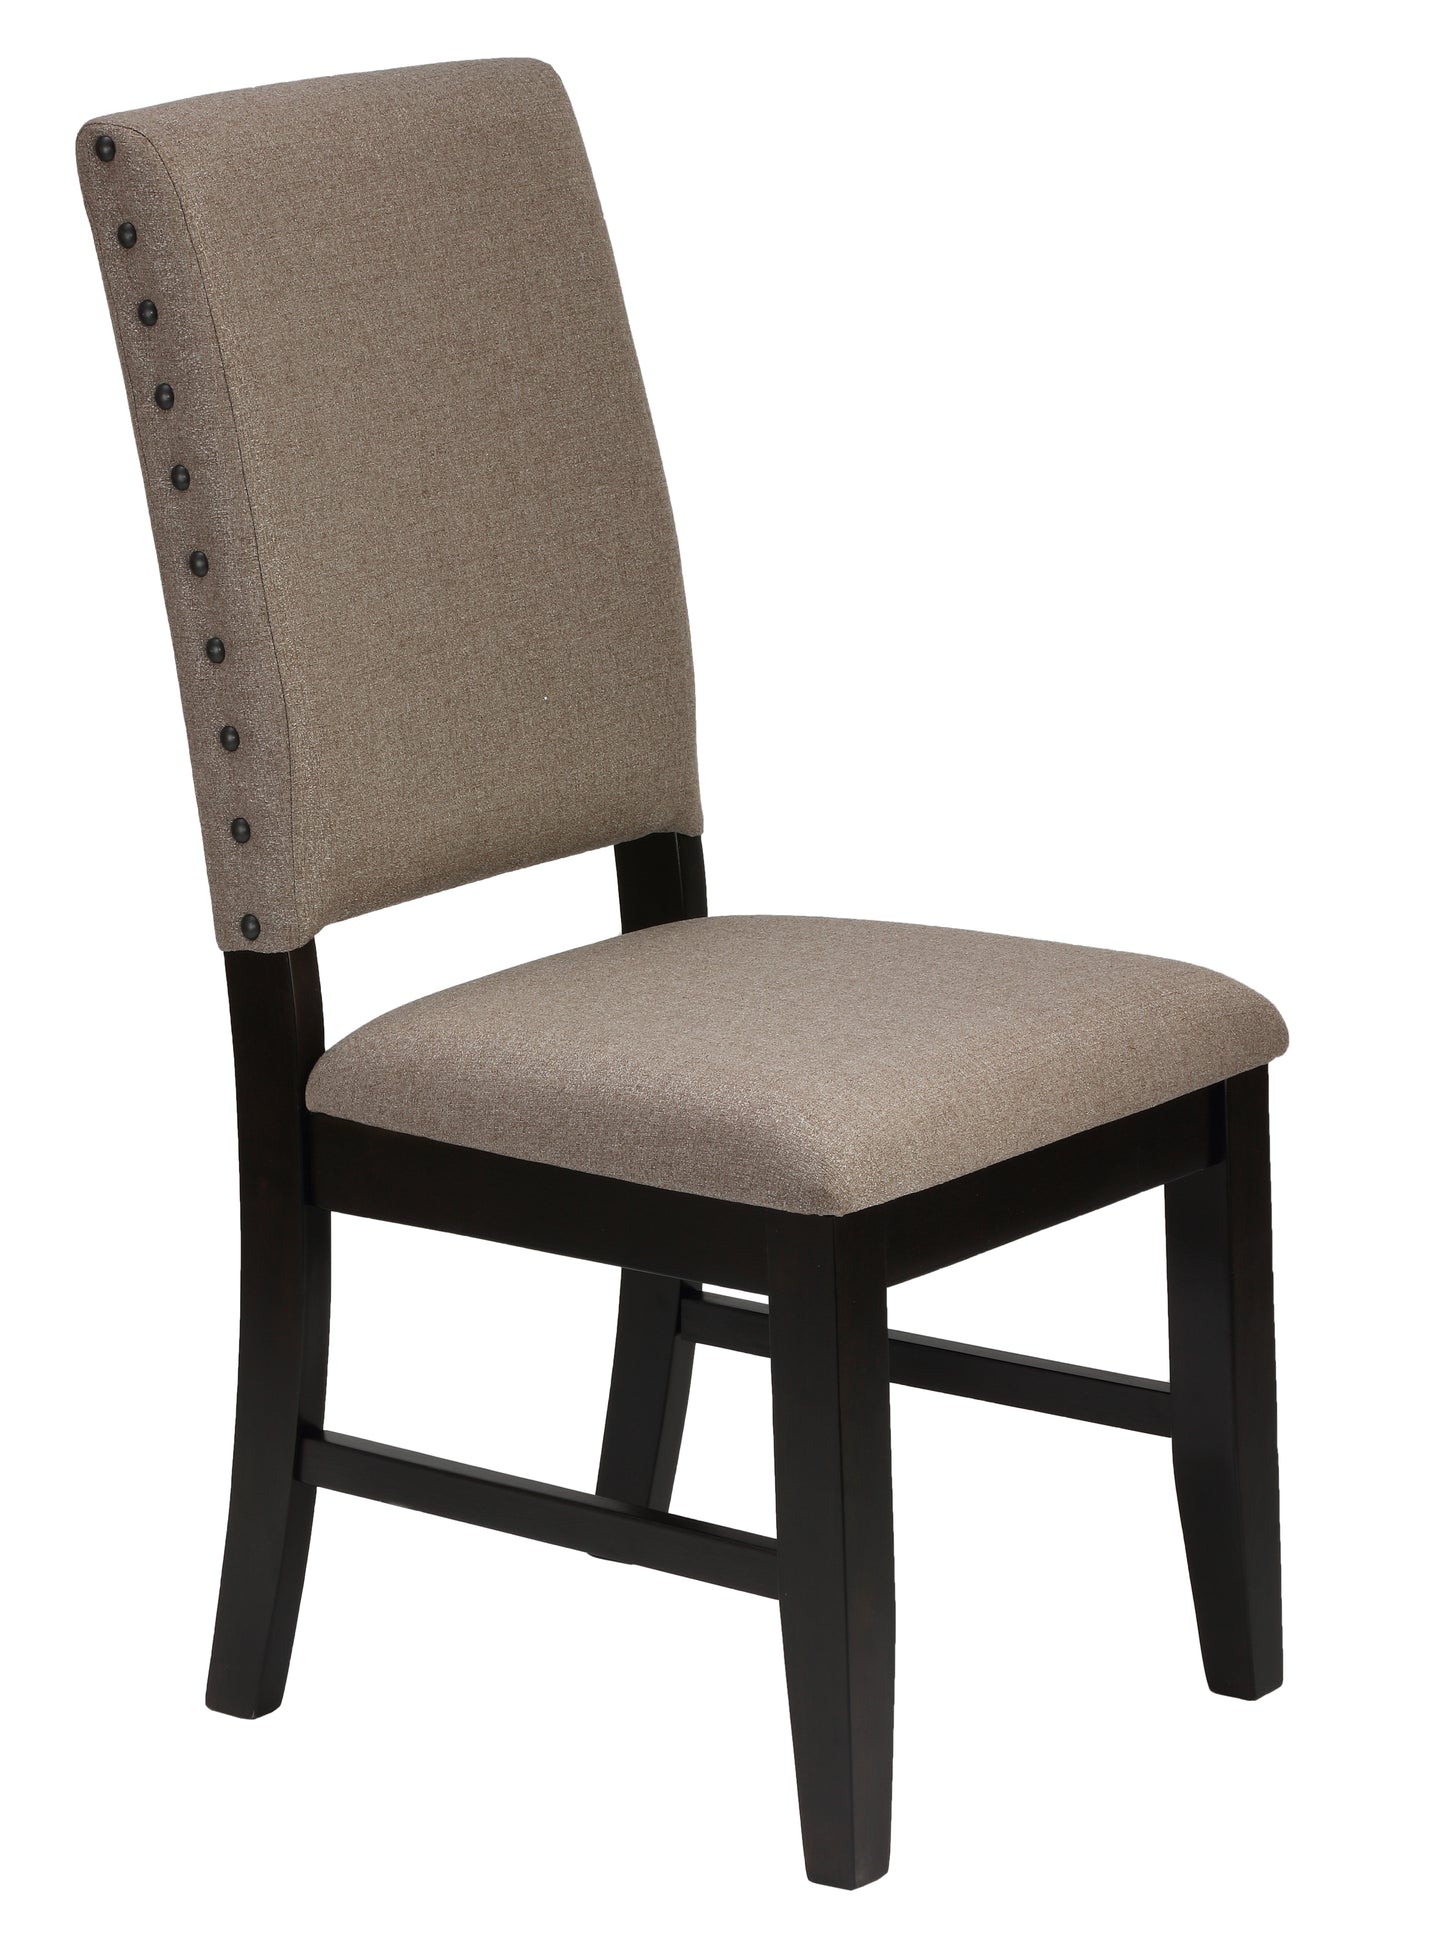 Cortesi Home Set of 2 Manchester Dining Chairs in Taupe Fabric with Black Legs and Nailhead Accents